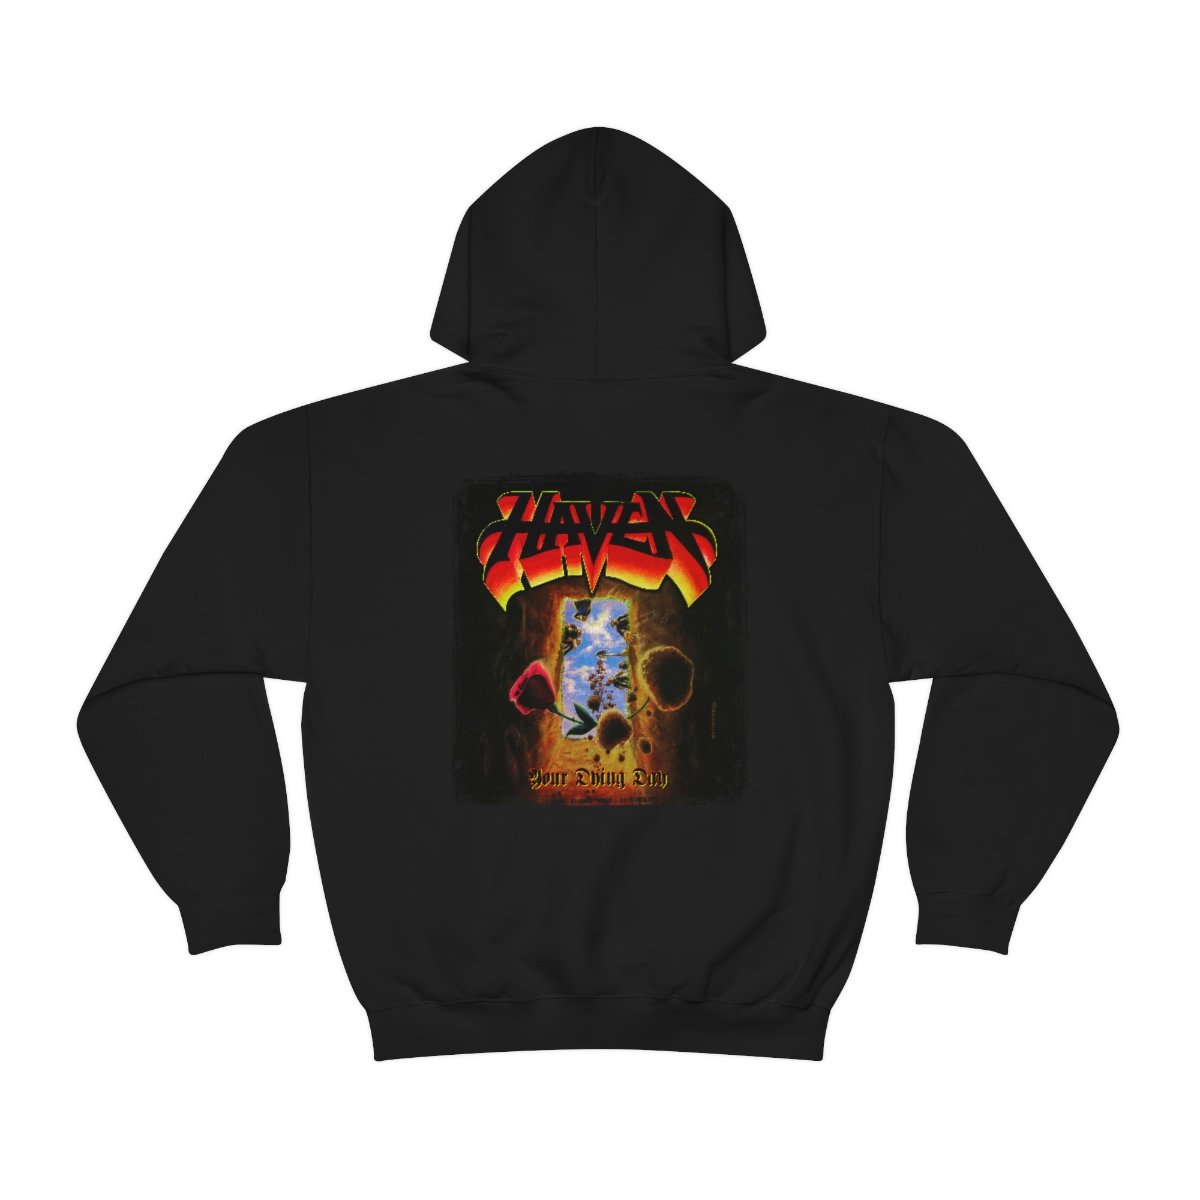 Haven – Your Dying Day with Logos Pullover Hooded Sweatshirt